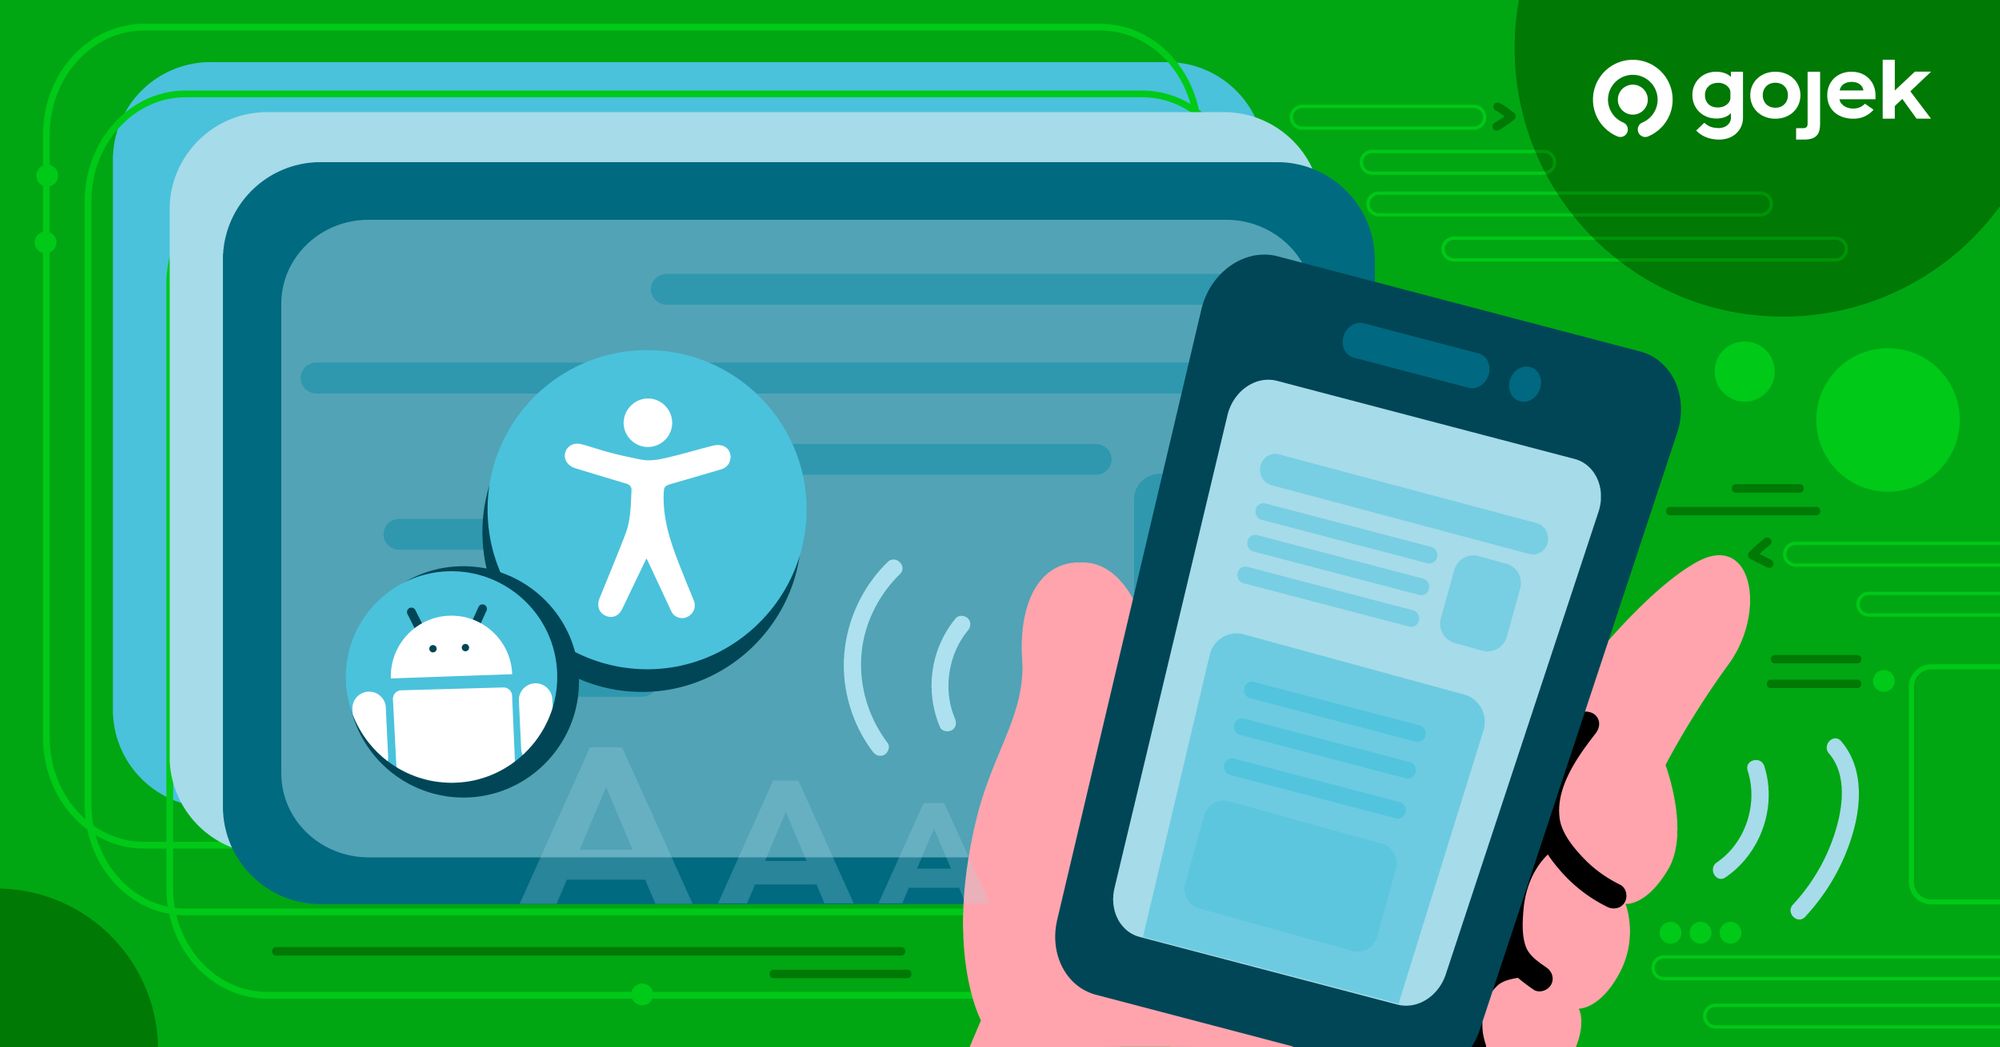 Accessibility & Inclusion: Building a #SuperApp for everyone